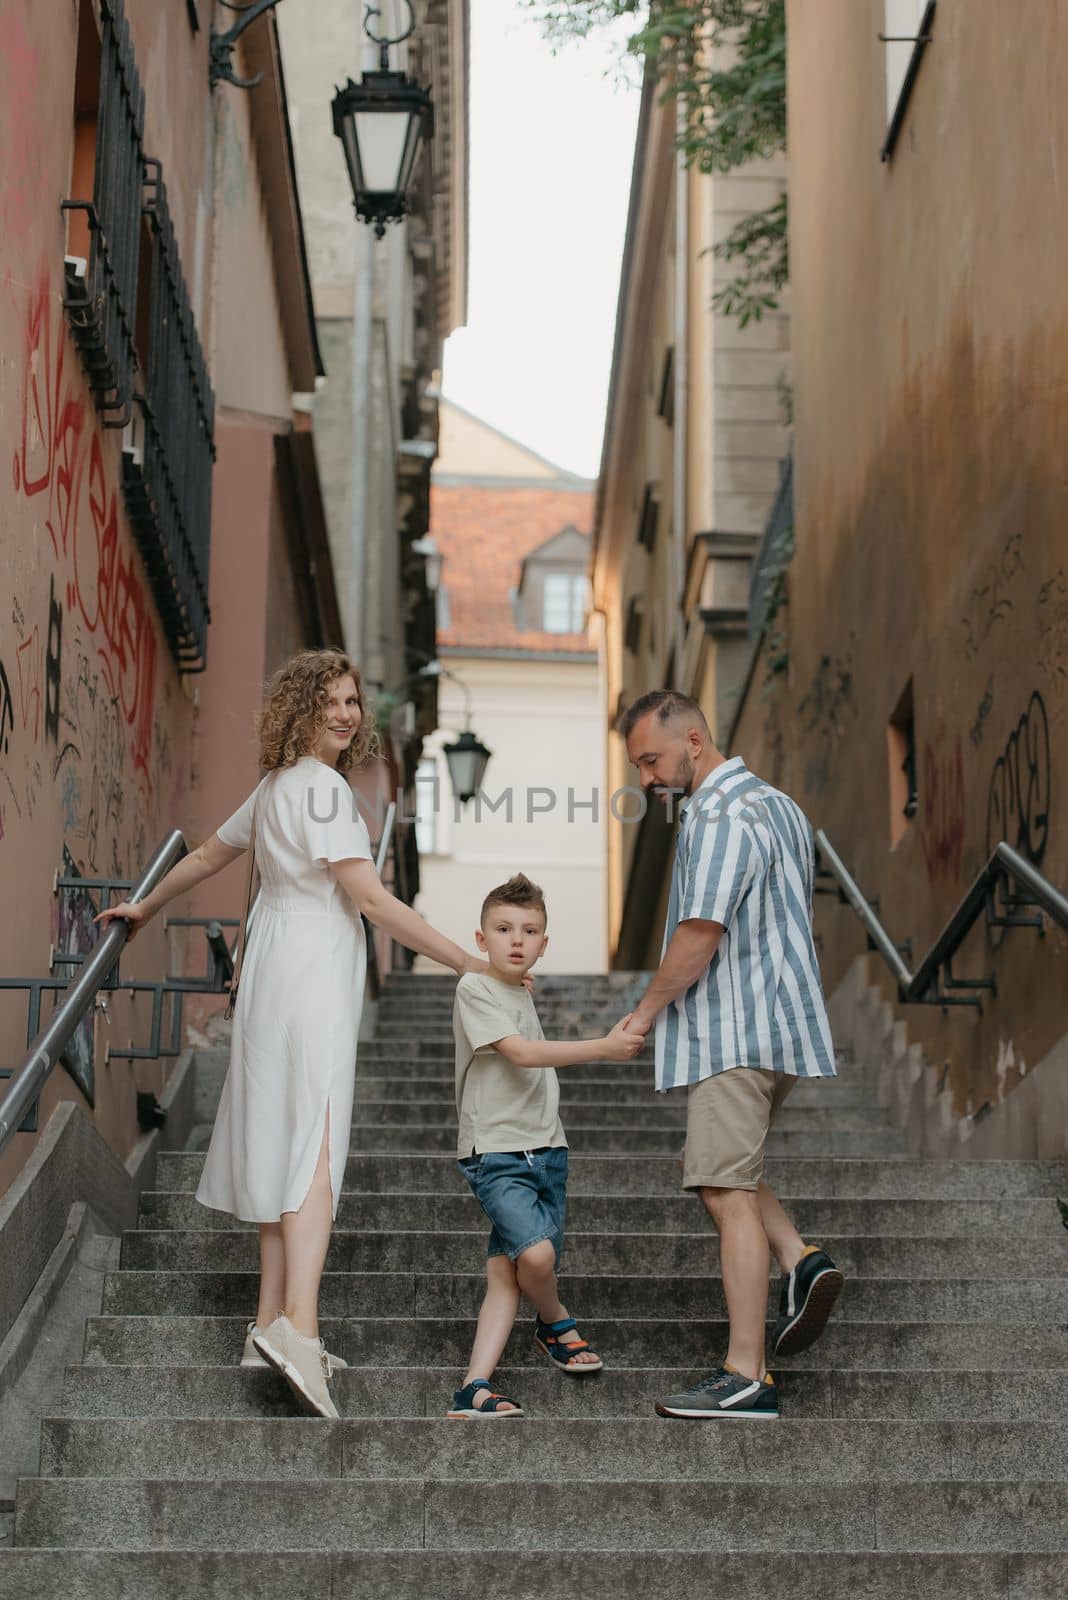 Family is climbing stairs in an old European town. by RomanJRoyce